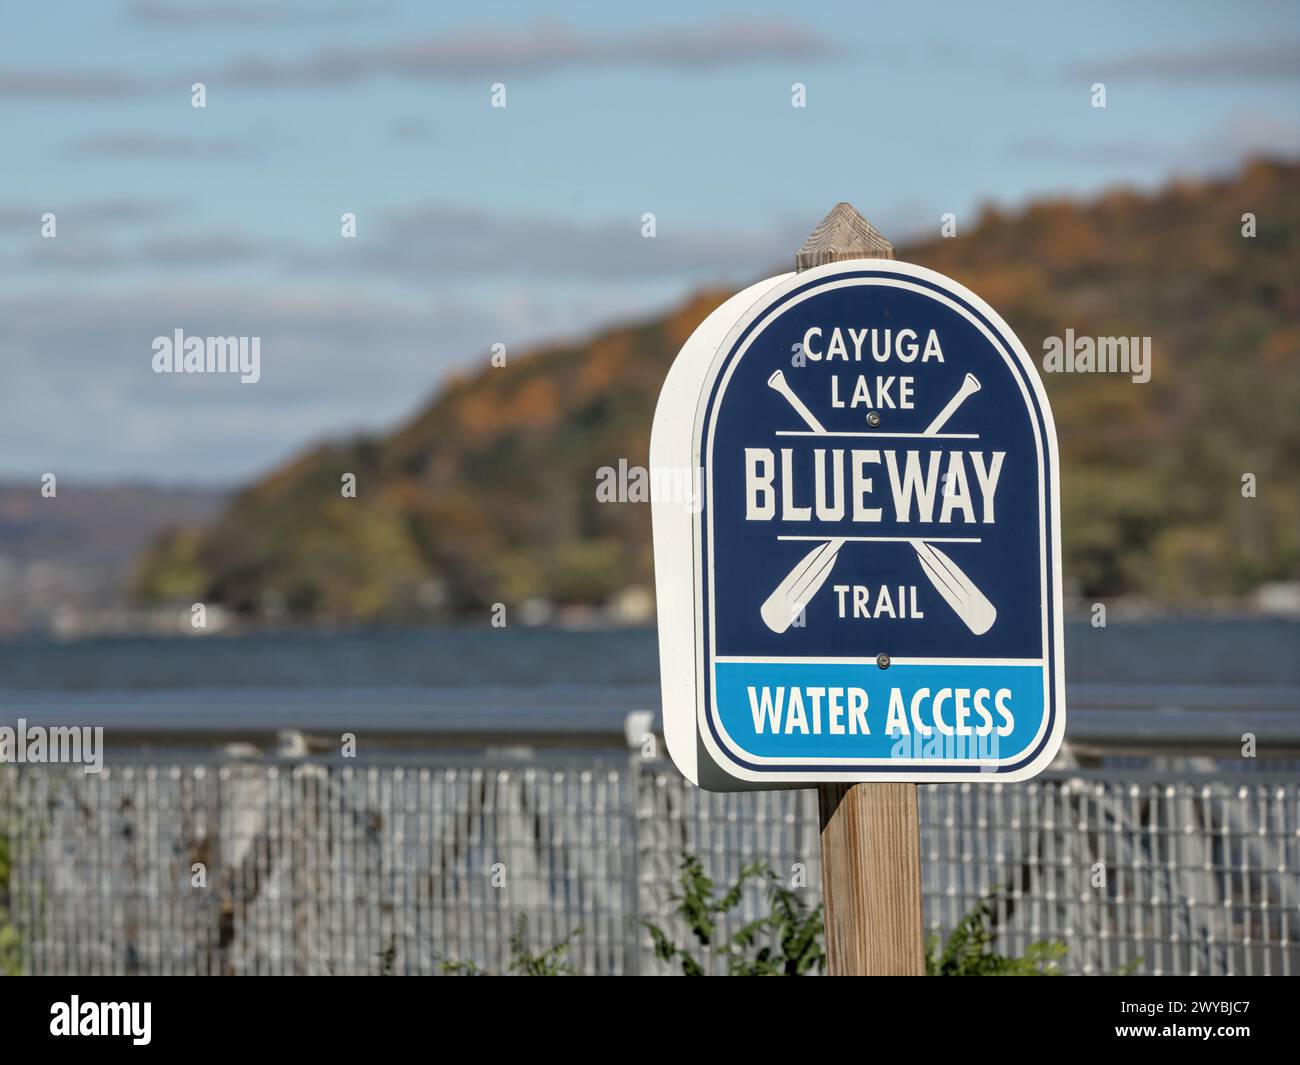 cayuga lake blueway trail water access sign in public park (finger lakes region of upstate new york) travel, tourism, ny state (ithaca hiking path nea Stock Photo